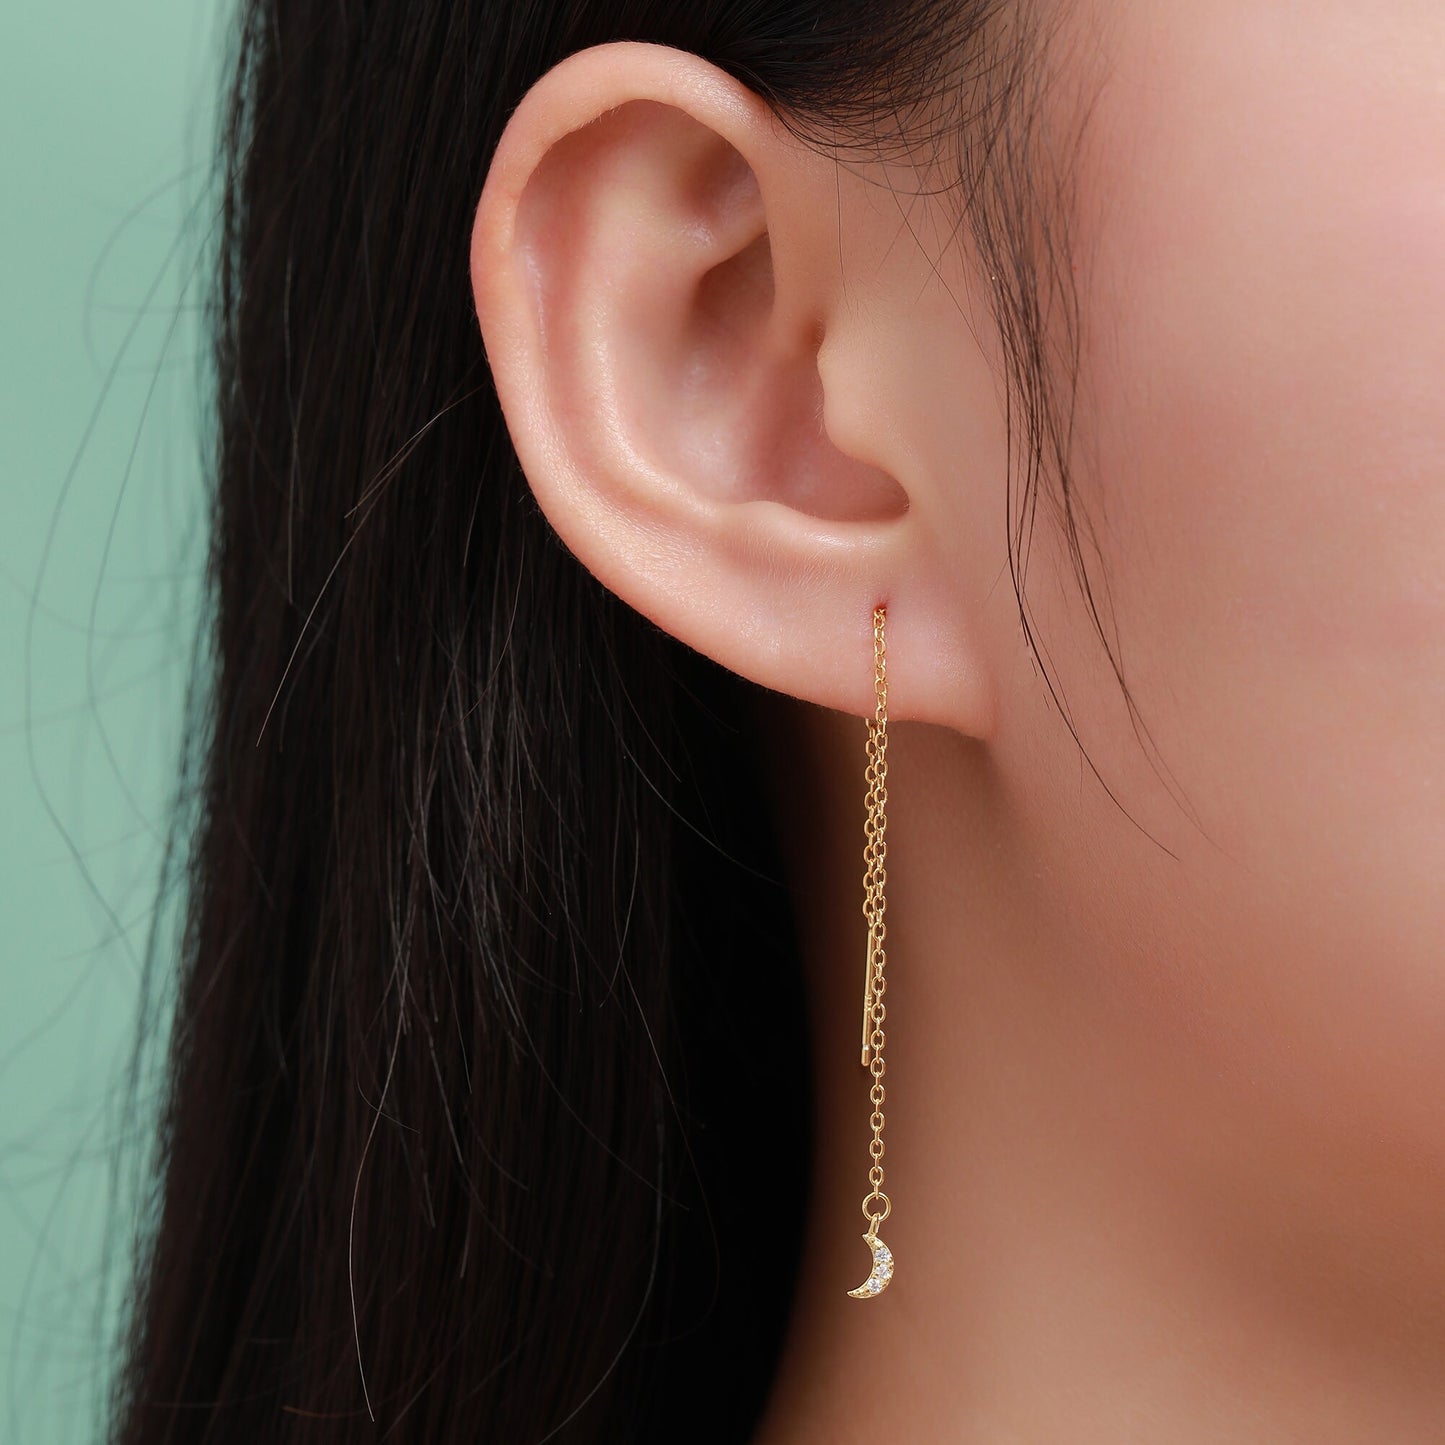 Asymmetric Tiny Moon and Star CZ Threader Earrings in Sterling Silver, Silver, Gold or Rose Gold, Moon and Star Ear Threaders